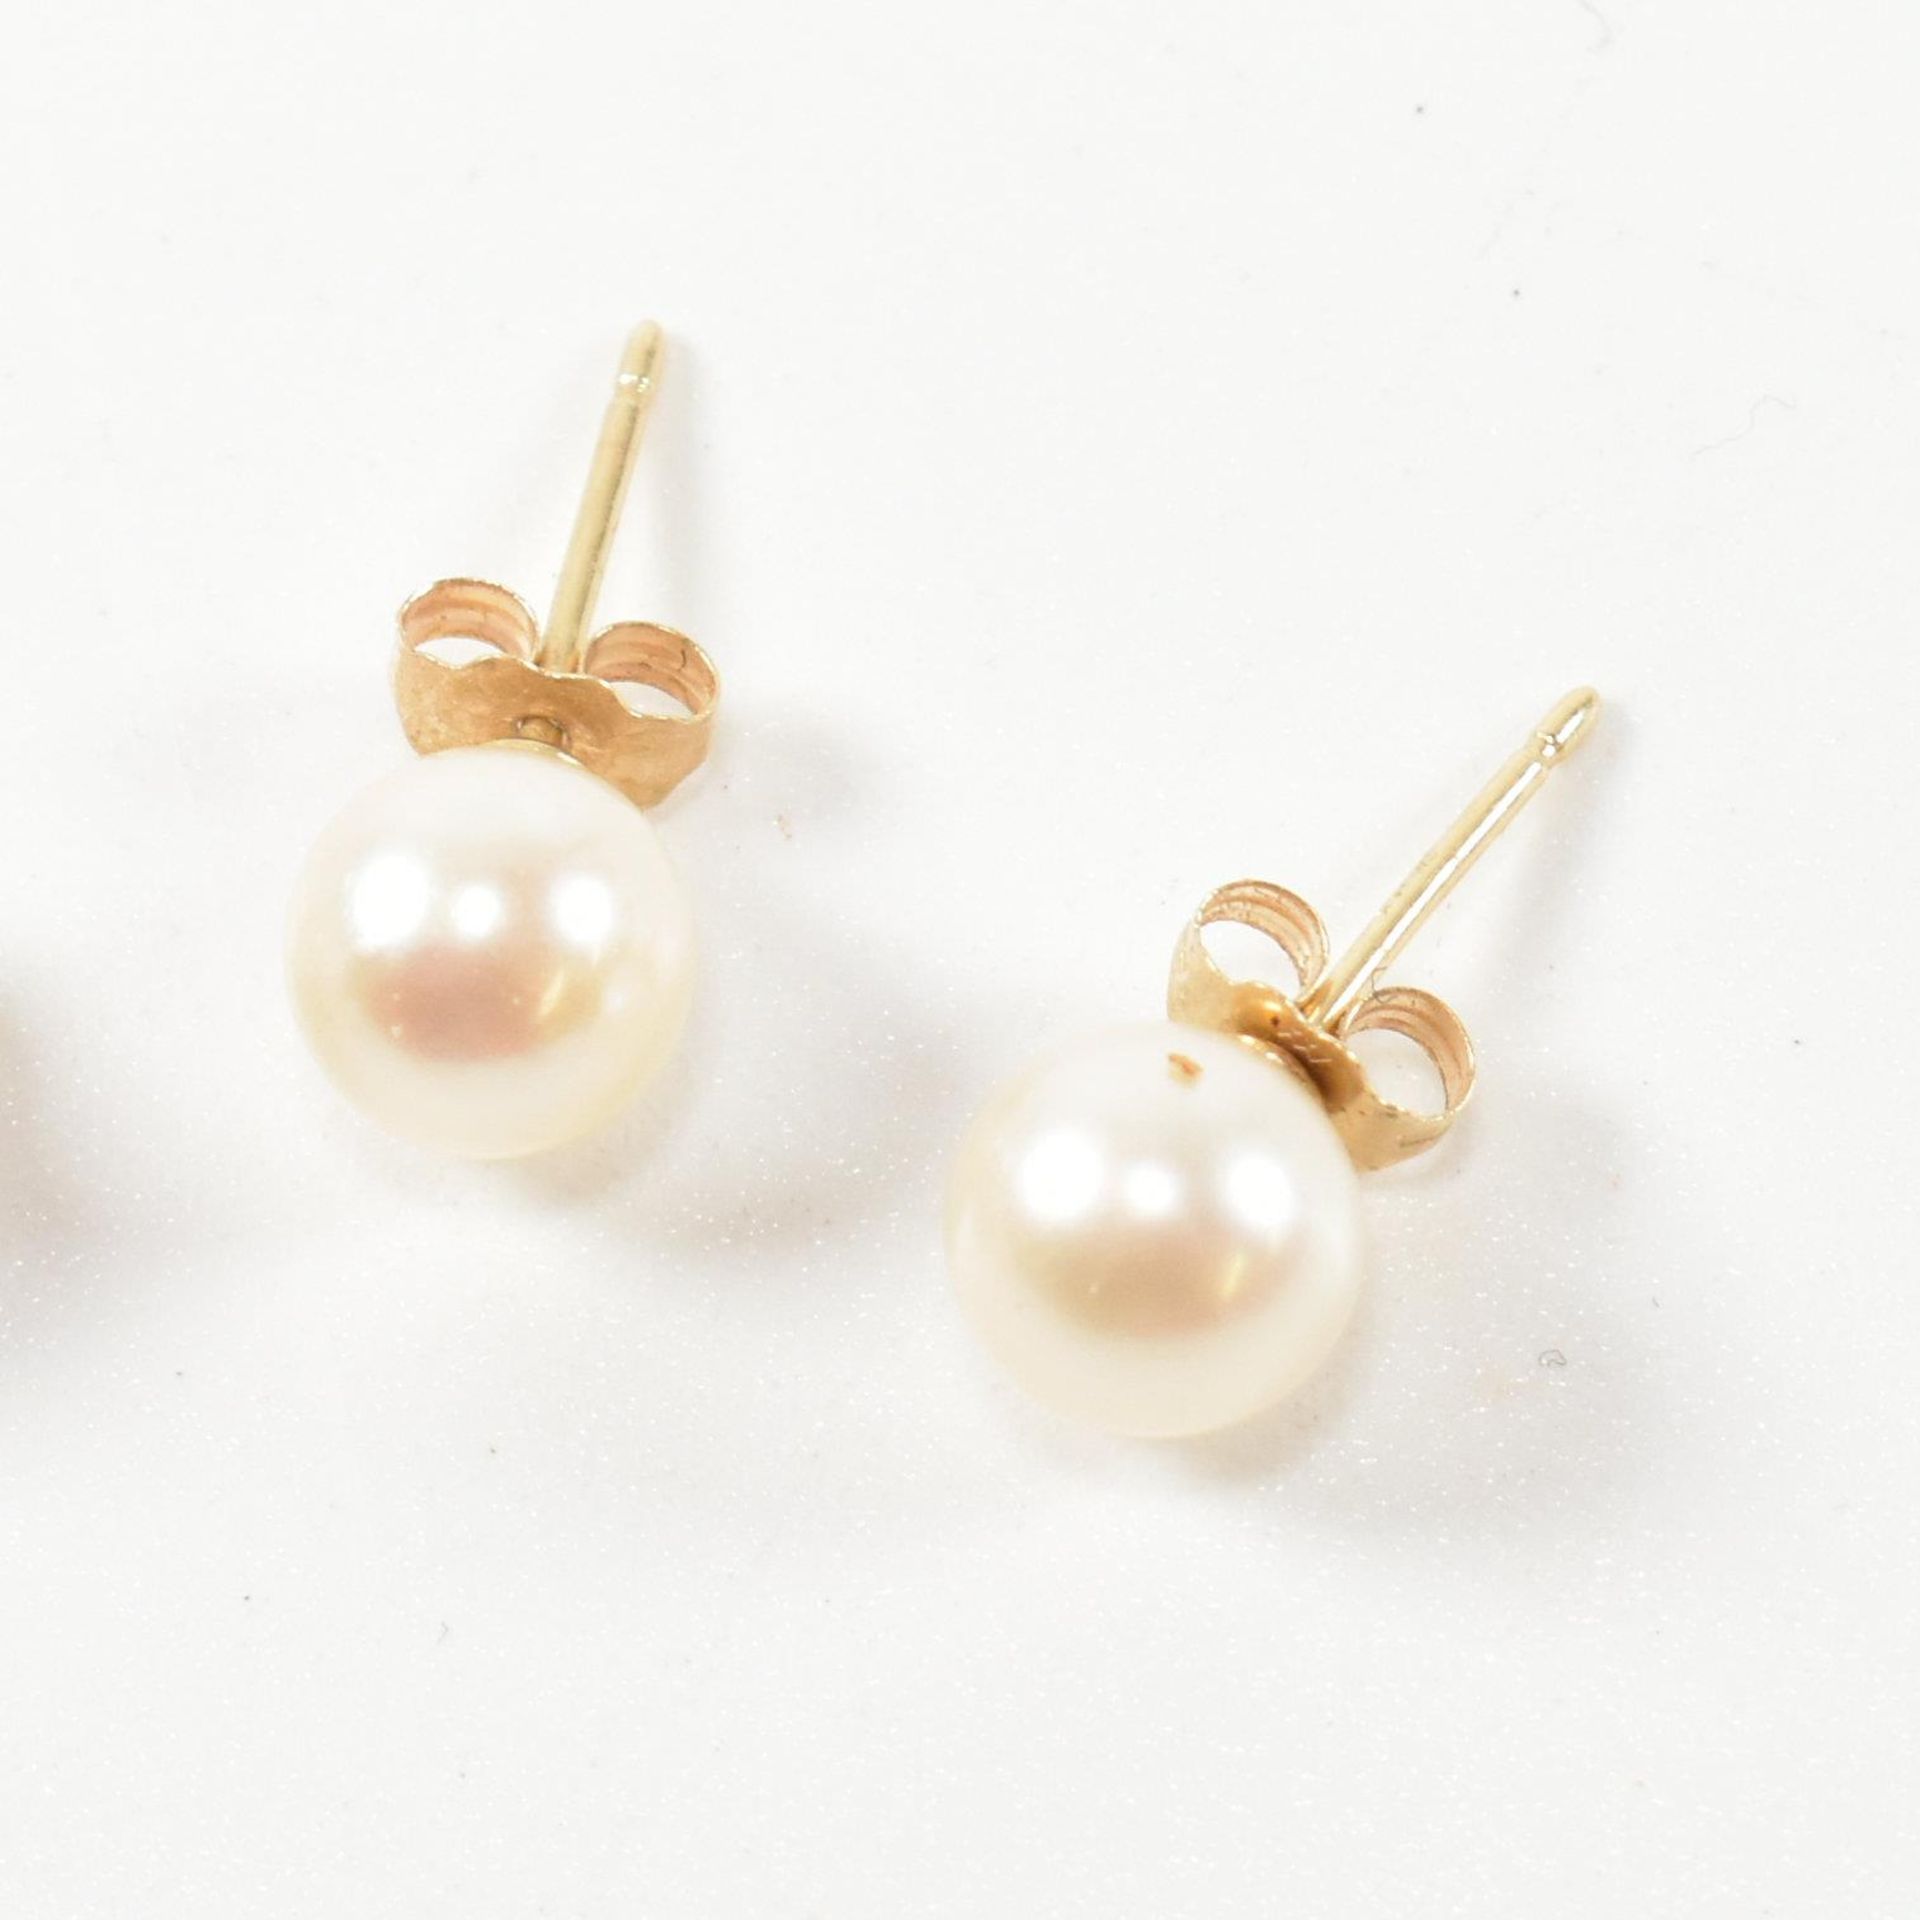 TWO PAIRS OF GOLD & CULTURED PEARL EARRINGS - Image 3 of 6